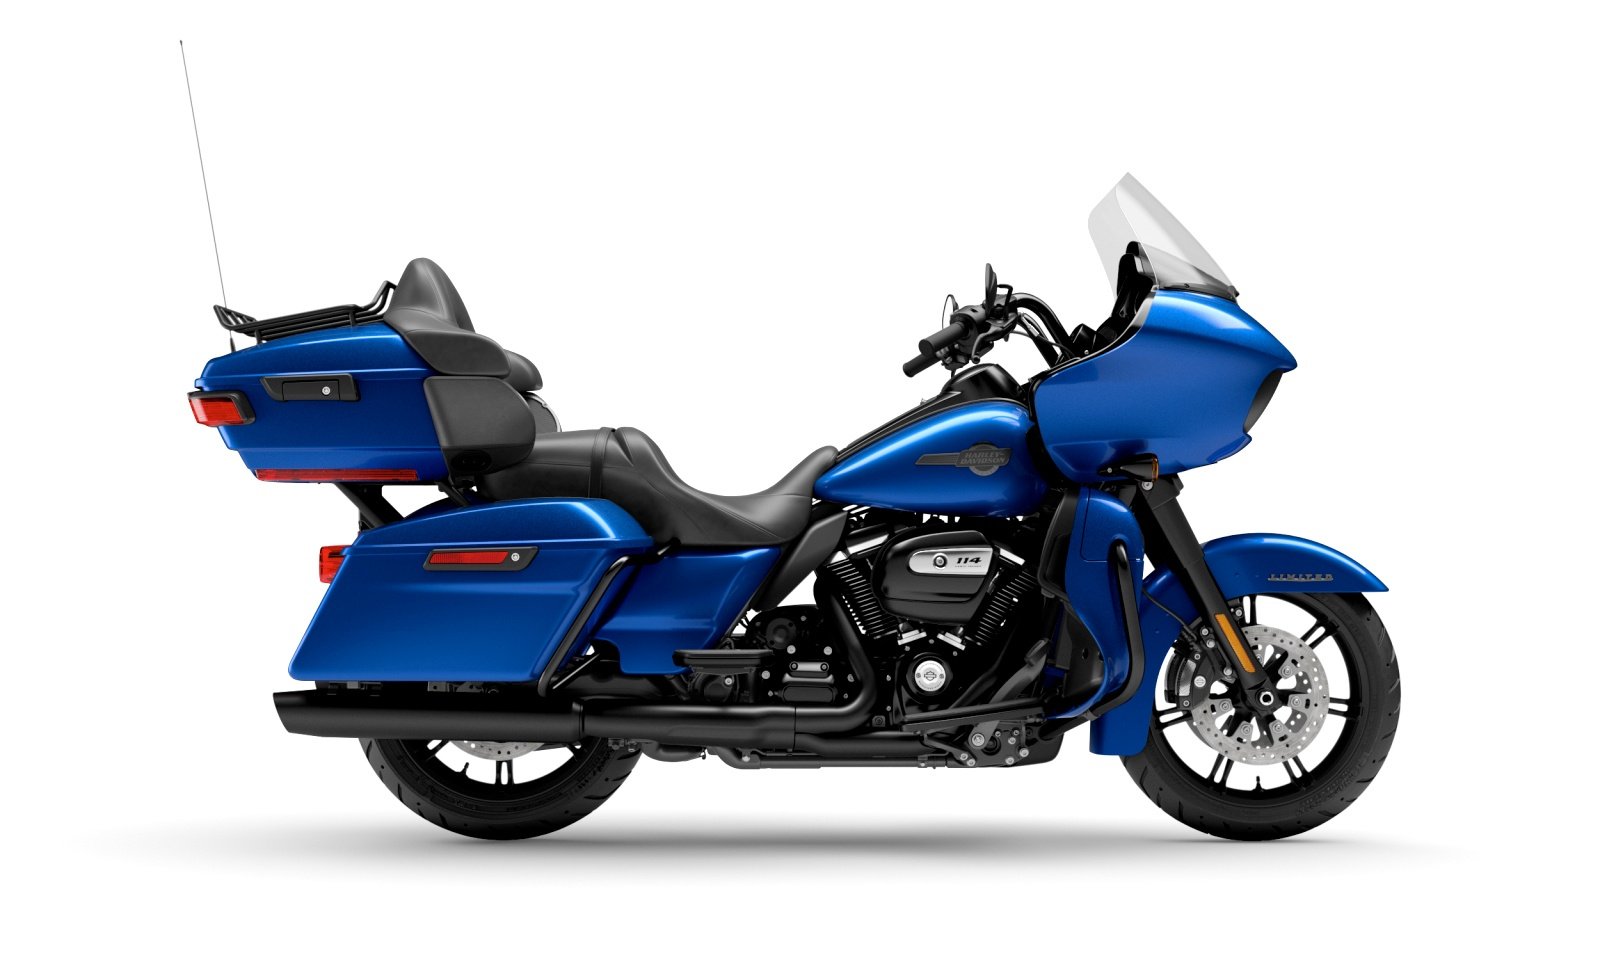 https://www.harley-davidson.com/content/dam/h-d/images/product-images/bikes/motorcycle/2024/2024-road-glide-limited/2024-road-glide-limited-m13b/360/2024-road-glide-limited-m13b-motorcycle-01.jpg?impolicy=myresize&rw=1600